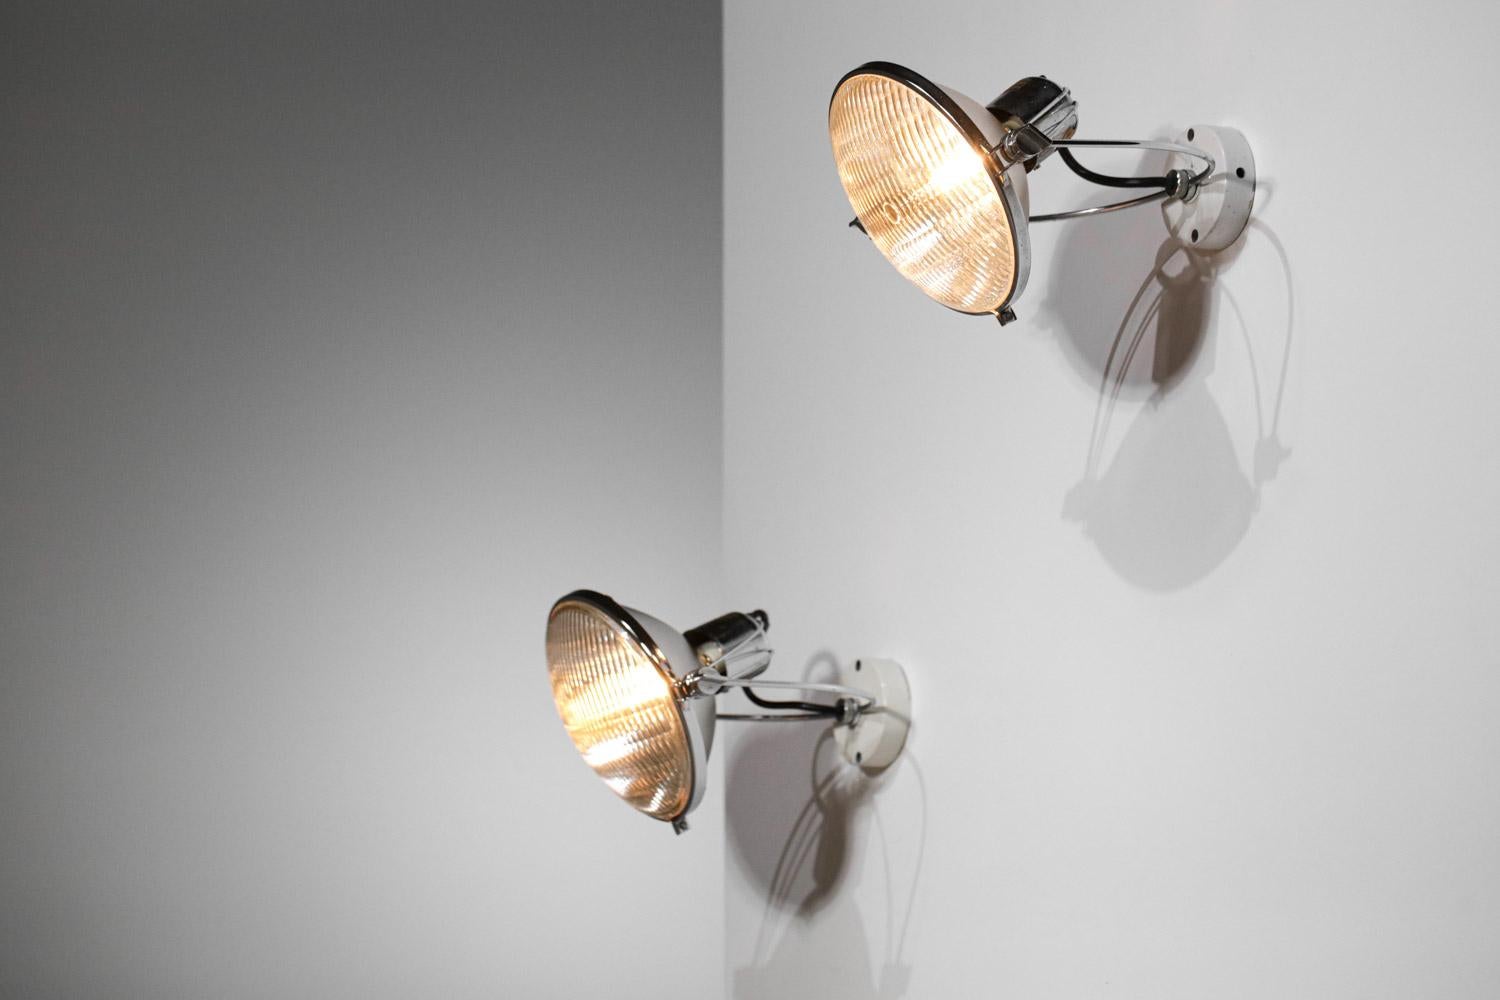 Pair of italian sconces 60's style Achille Castiglioni glass and chromed metal  For Sale 1